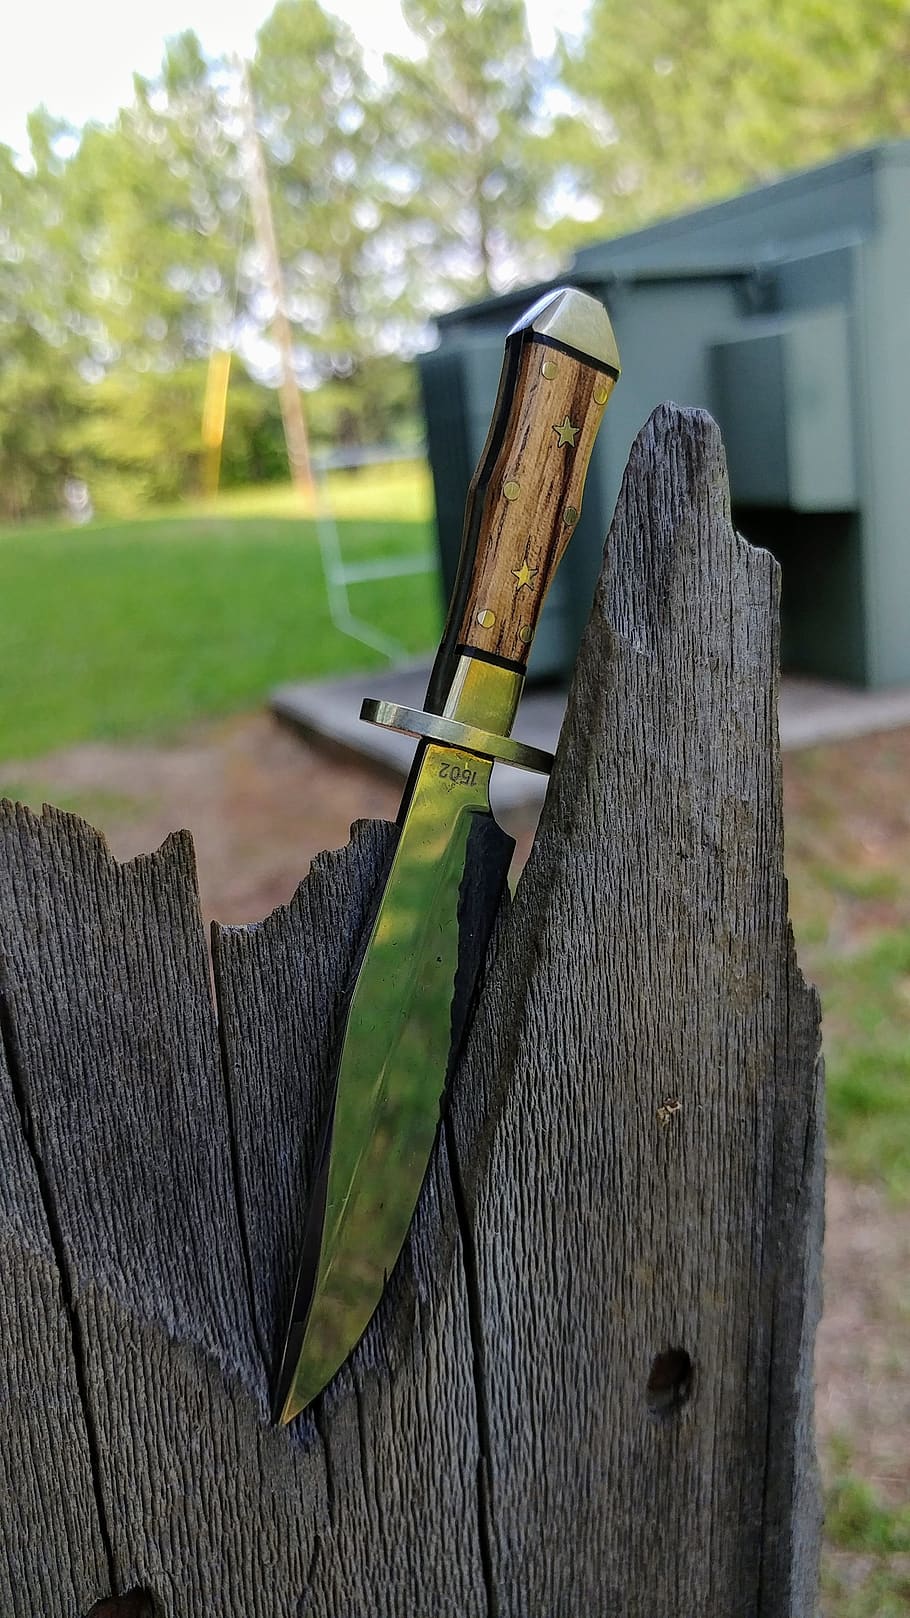 bowie, bowie knife, sharp, outdoors, knife, knives, outdoor, camping, wood, survival